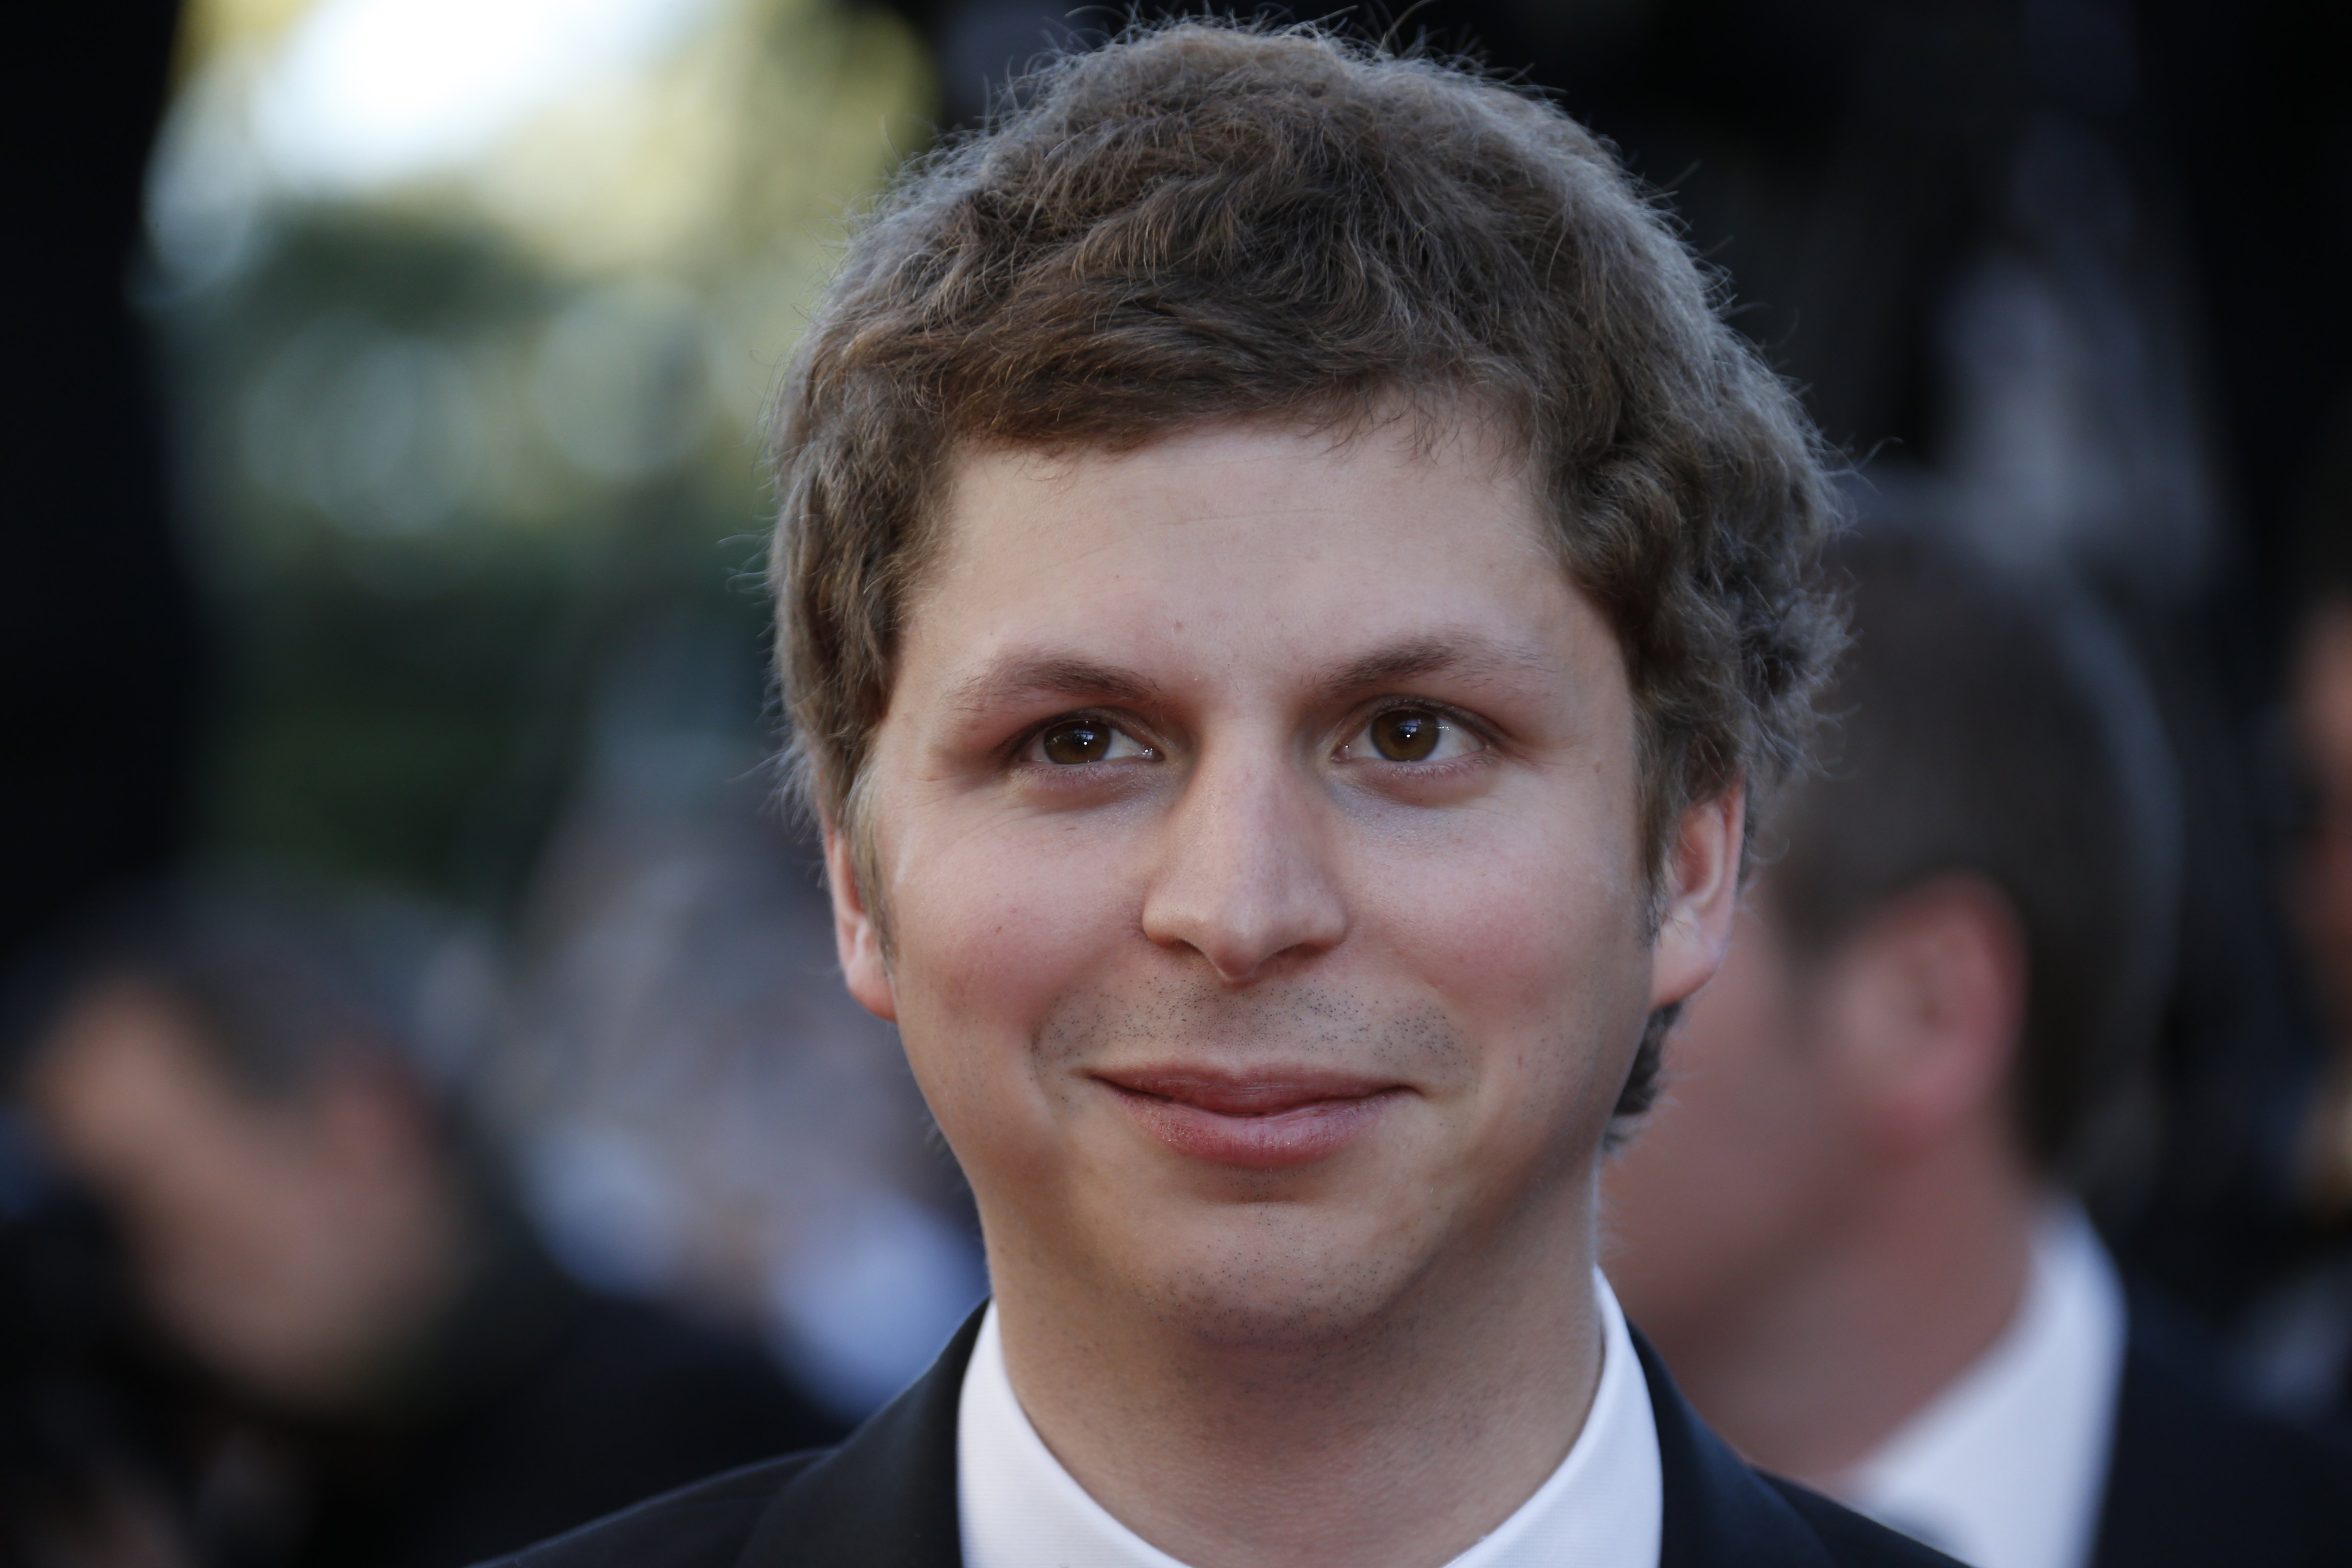 Canadian actor Michael Cera poses on May 24, 2013 as he arrives for the screening of the film "The Immigrant" presented in Competition at the 66th edition of the Cannes Film Festival in Cannes. Cannes, one of the world's top film festivals, opened on May 15 and will climax on May 26 with awards selected by a jury headed this year by Hollywood legend Steven Spielberg.      AFP PHOTO / VALERY HACHE        (Photo credit should read VALERY HACHE/AFP/Getty Images) (Valery Hache—AFP/Getty Images)